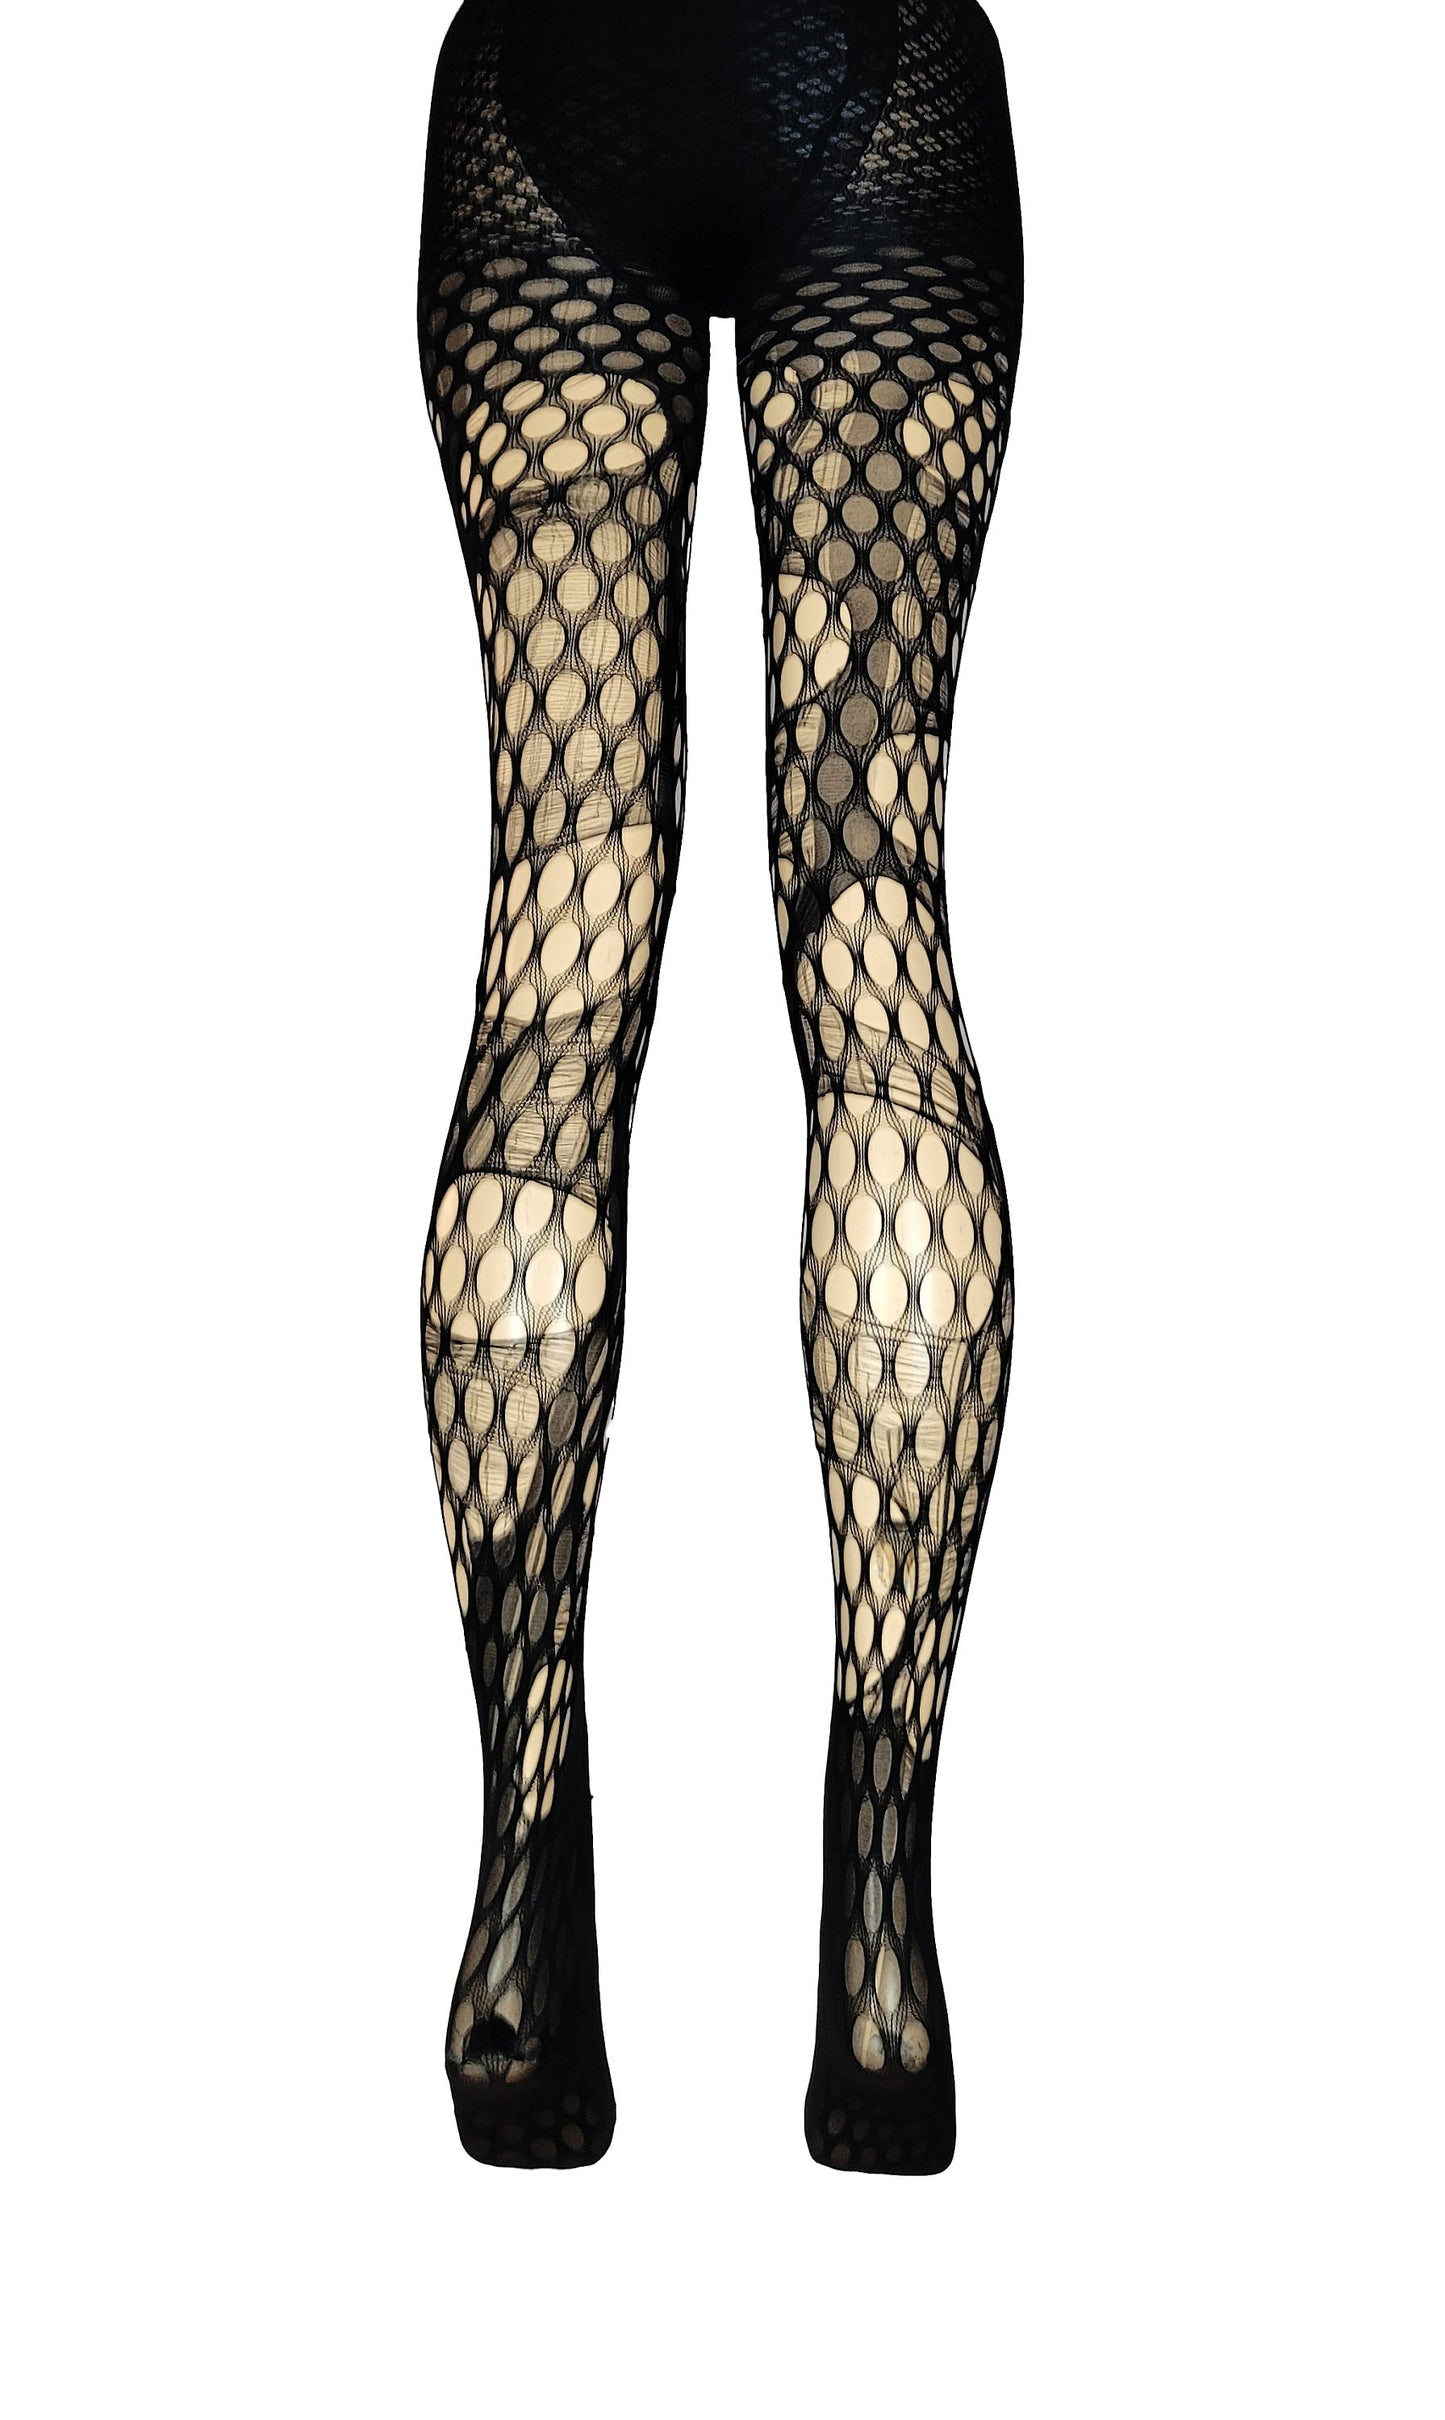 Rhinestone Fishnet Ripped Tights Fishnet Tights Glitter Tights Gothic Tights  Tattered & Torn Tights Ripped Leggings Agoraphobix -  Norway